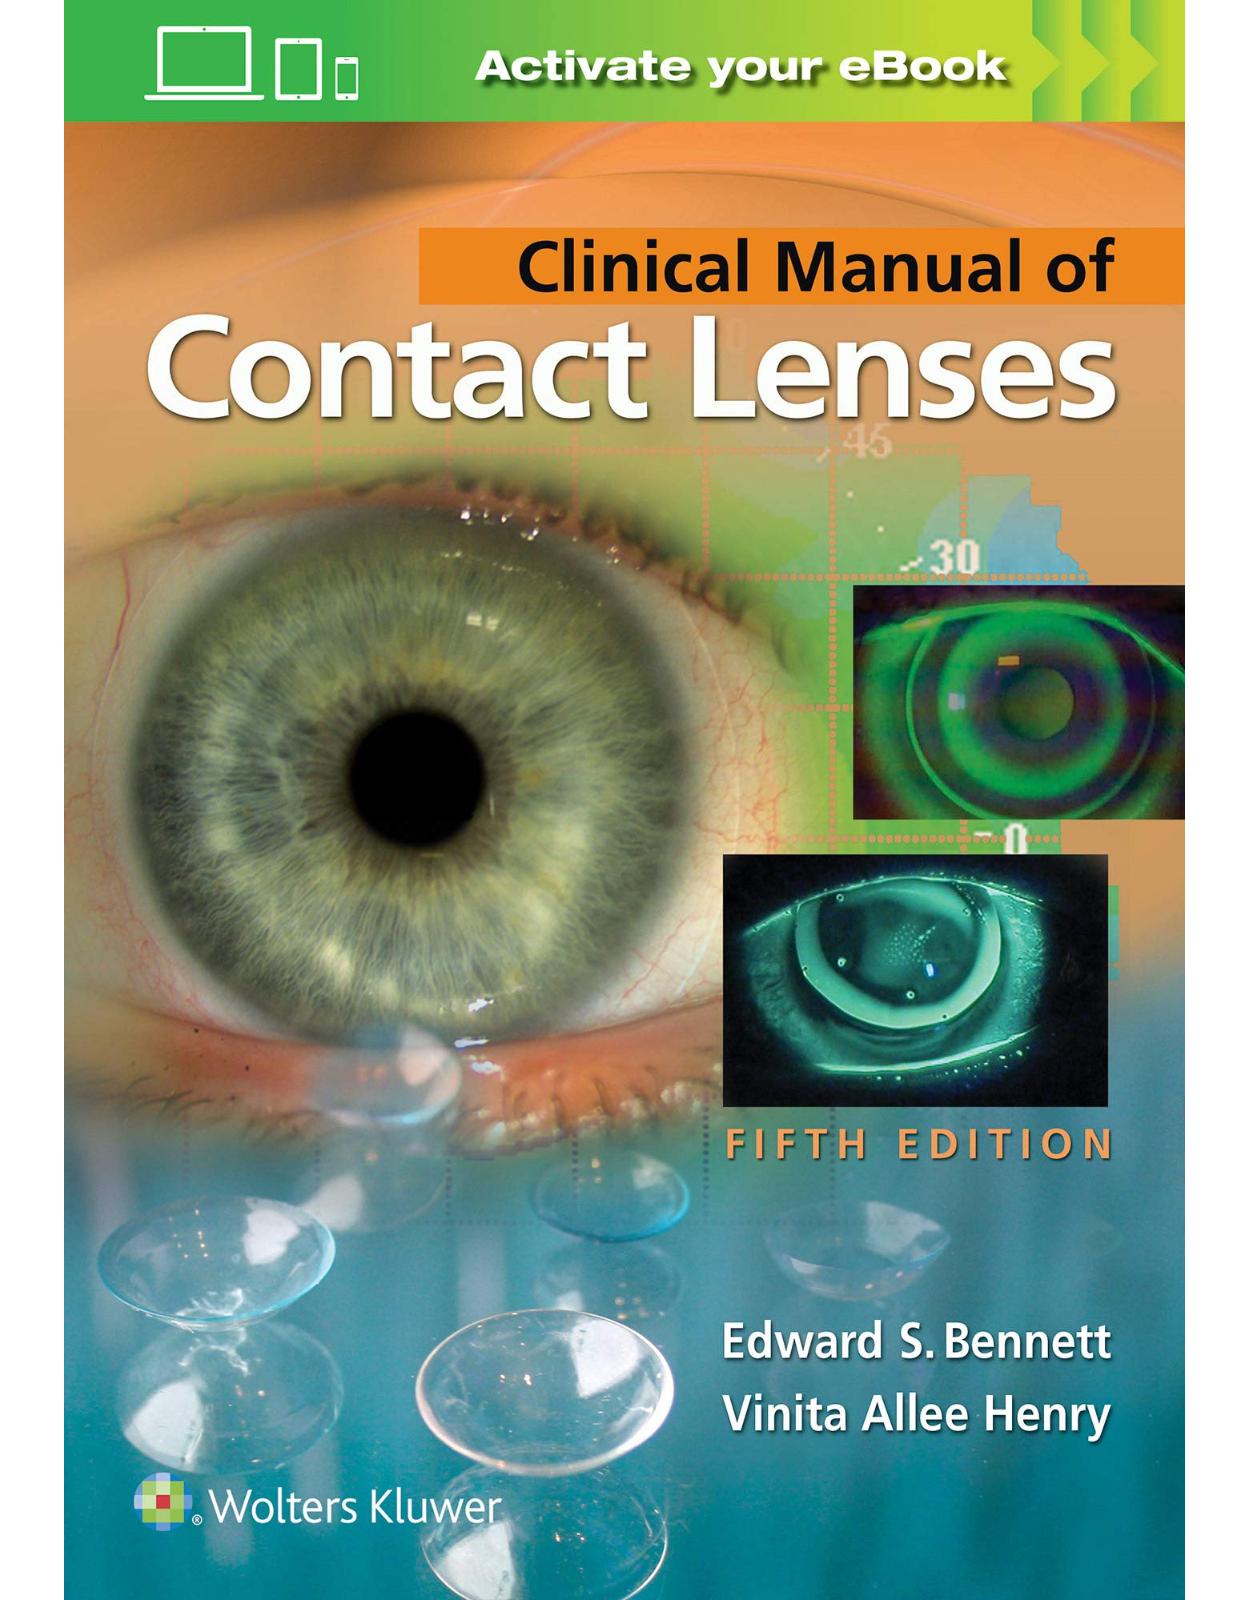 Clinical Manual of Contact Lenses 